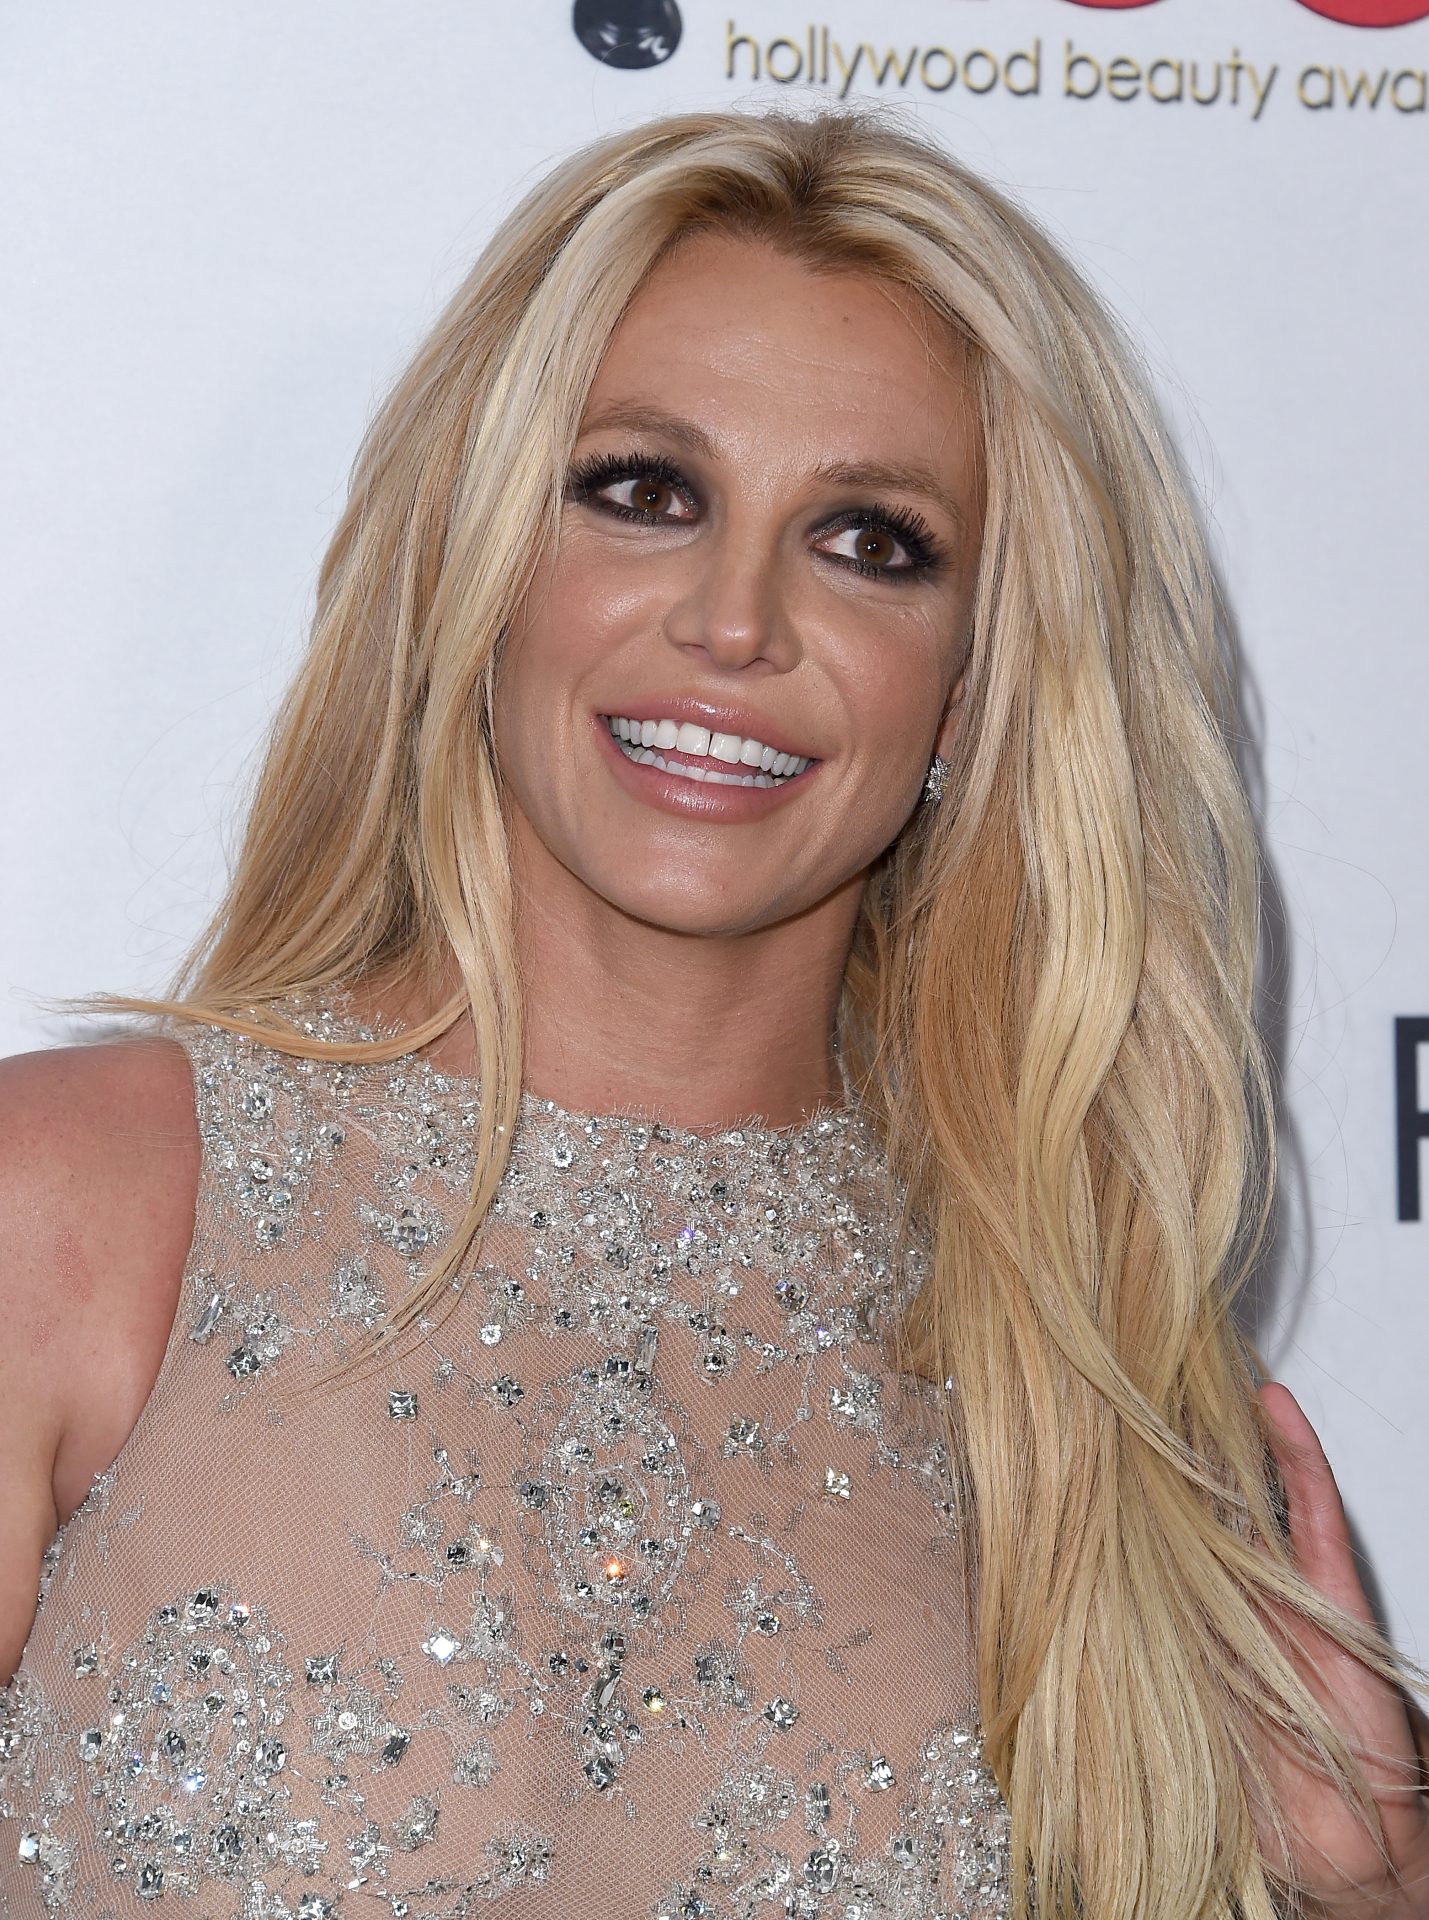 Spears Porn - The reaction to Britney's holiday photos shows extreme misogyny